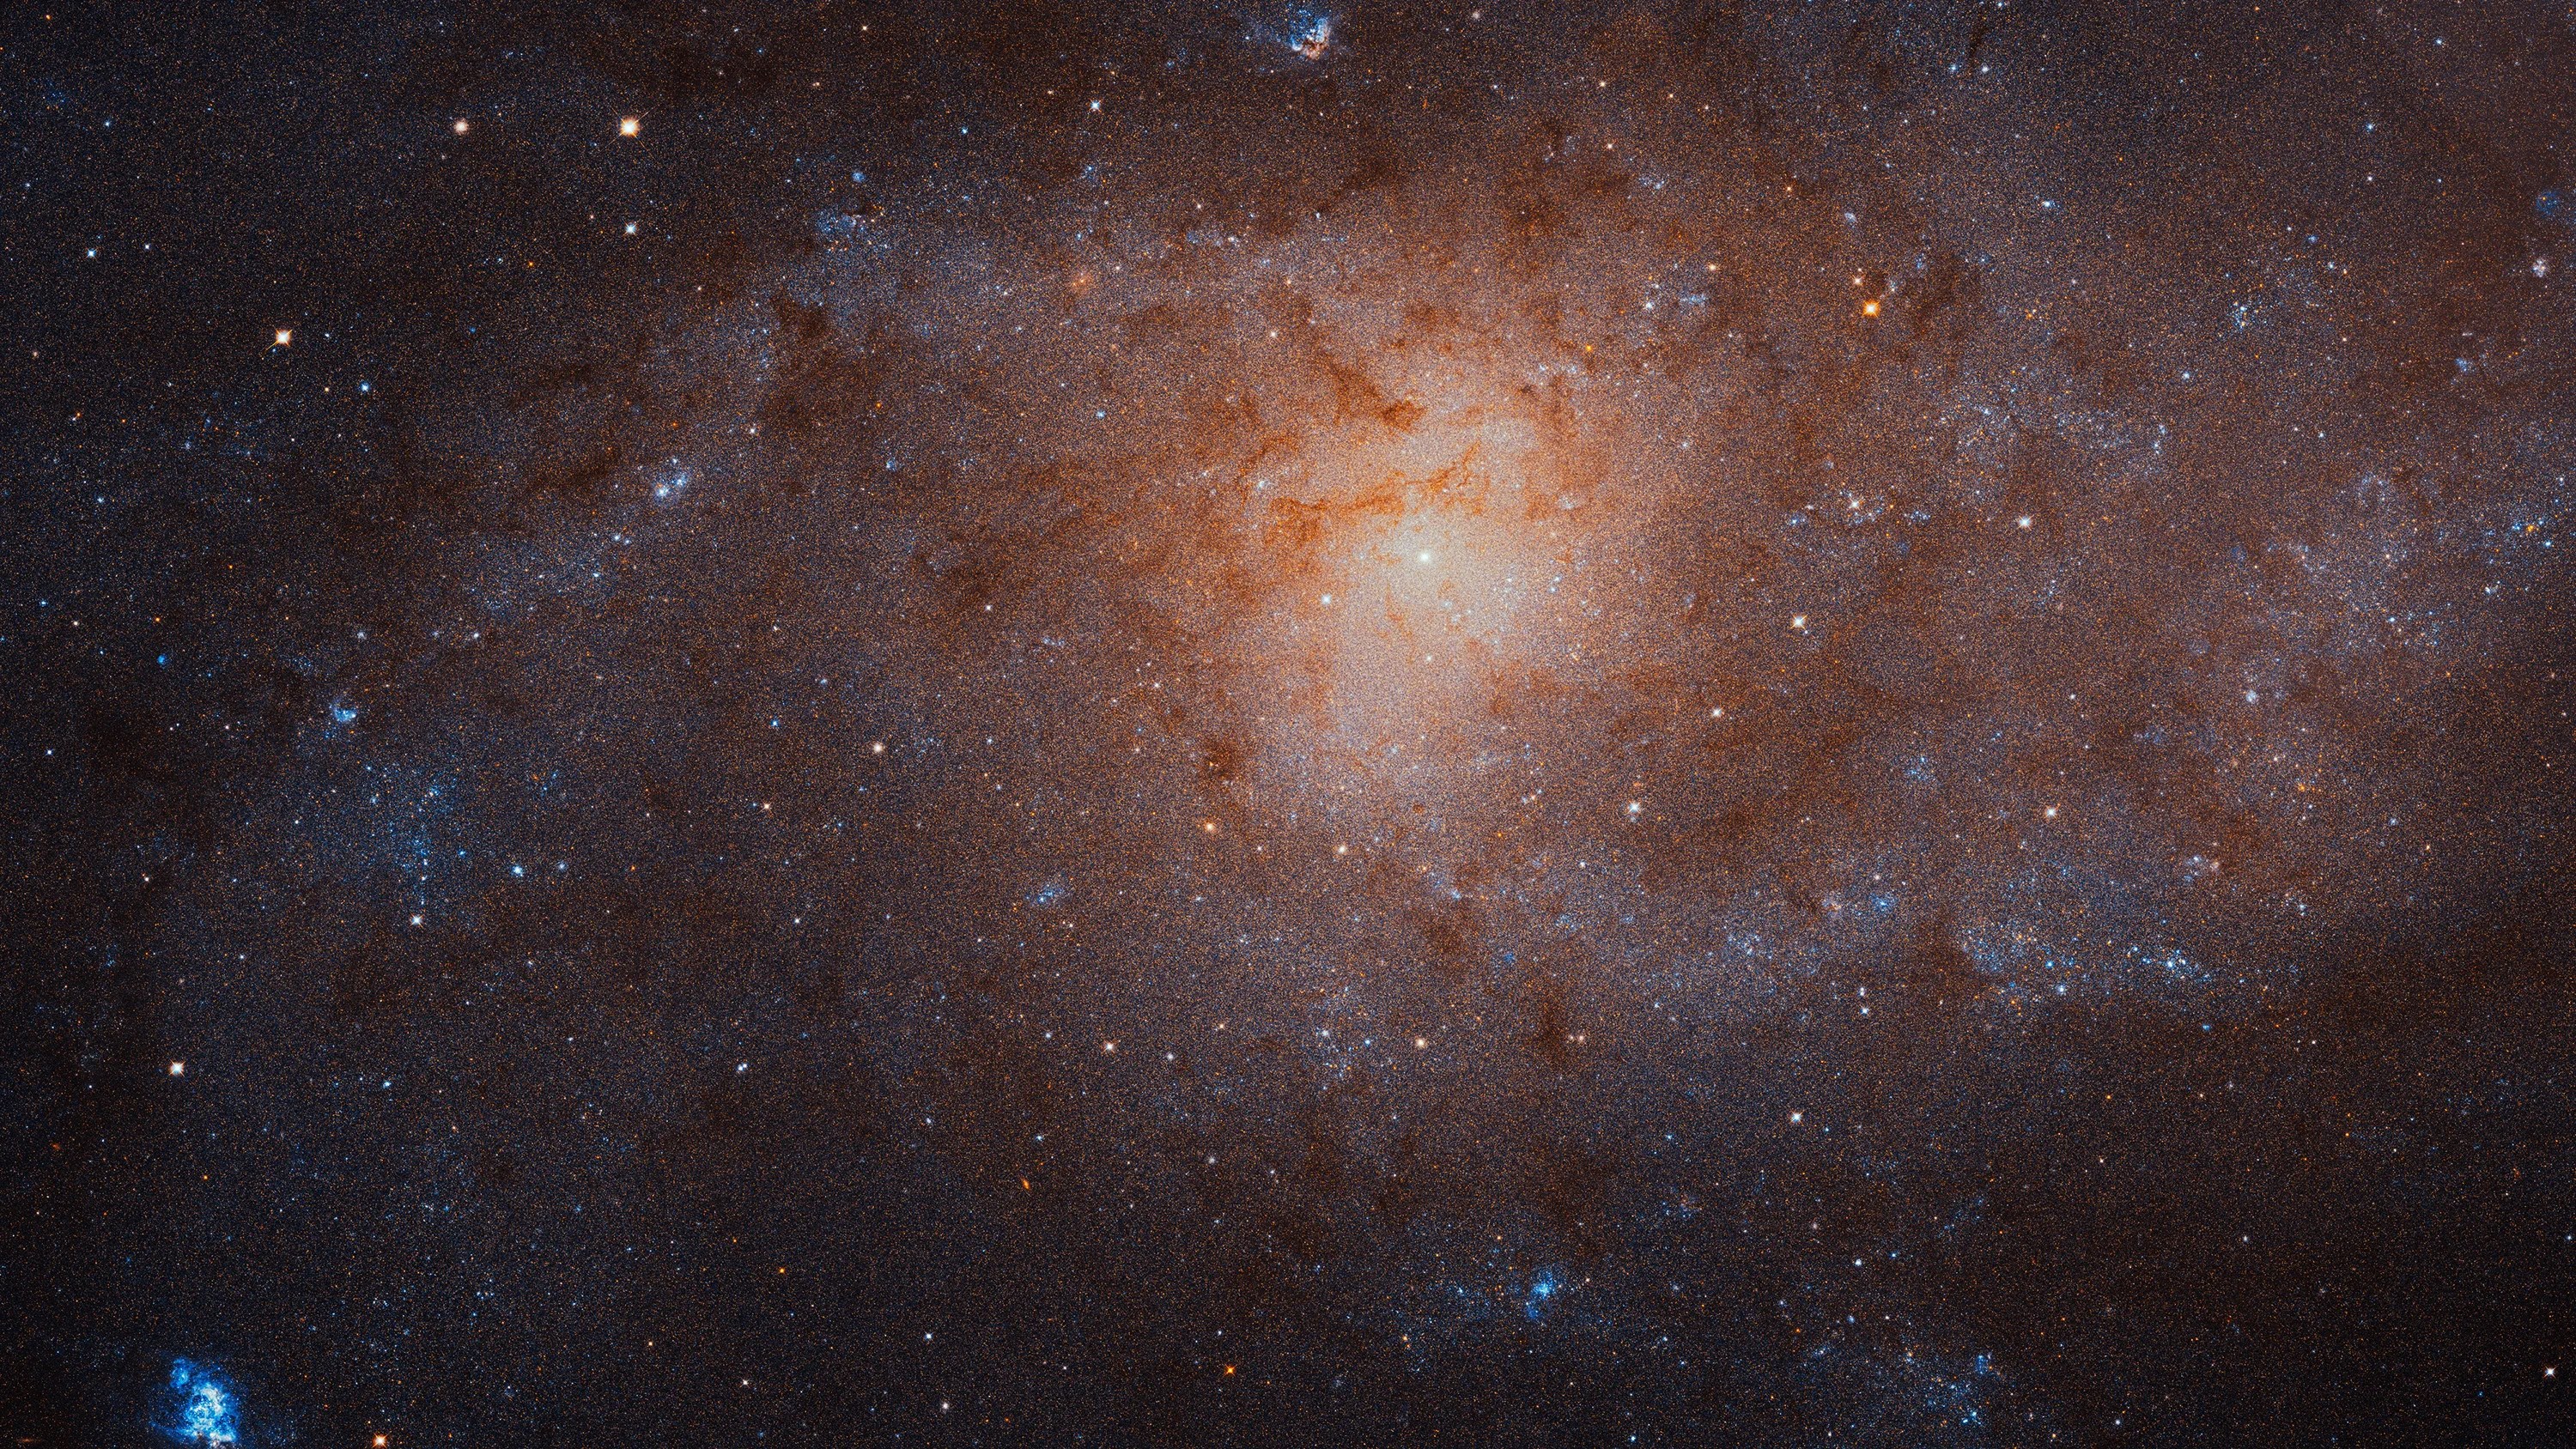 A galaxy image with little structure but a clear central region of yellowish stars and an exterior of dust and blue star formation.